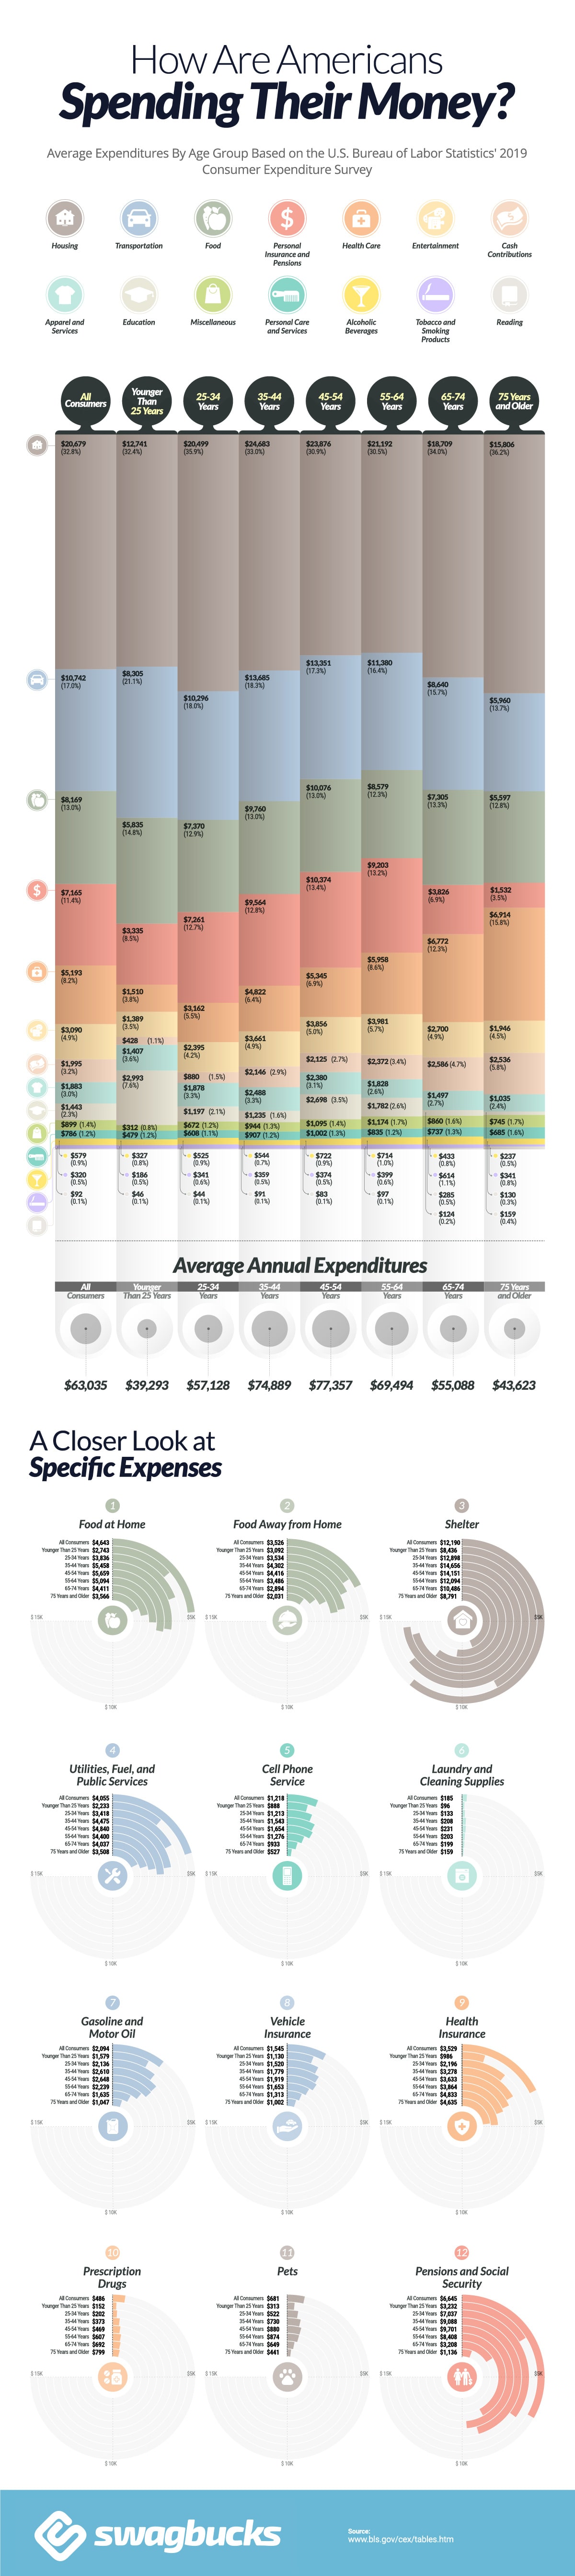 How Are Americans Spending Their Money? - Swagbucks Coupons and Paid Online Surveys - Infographic